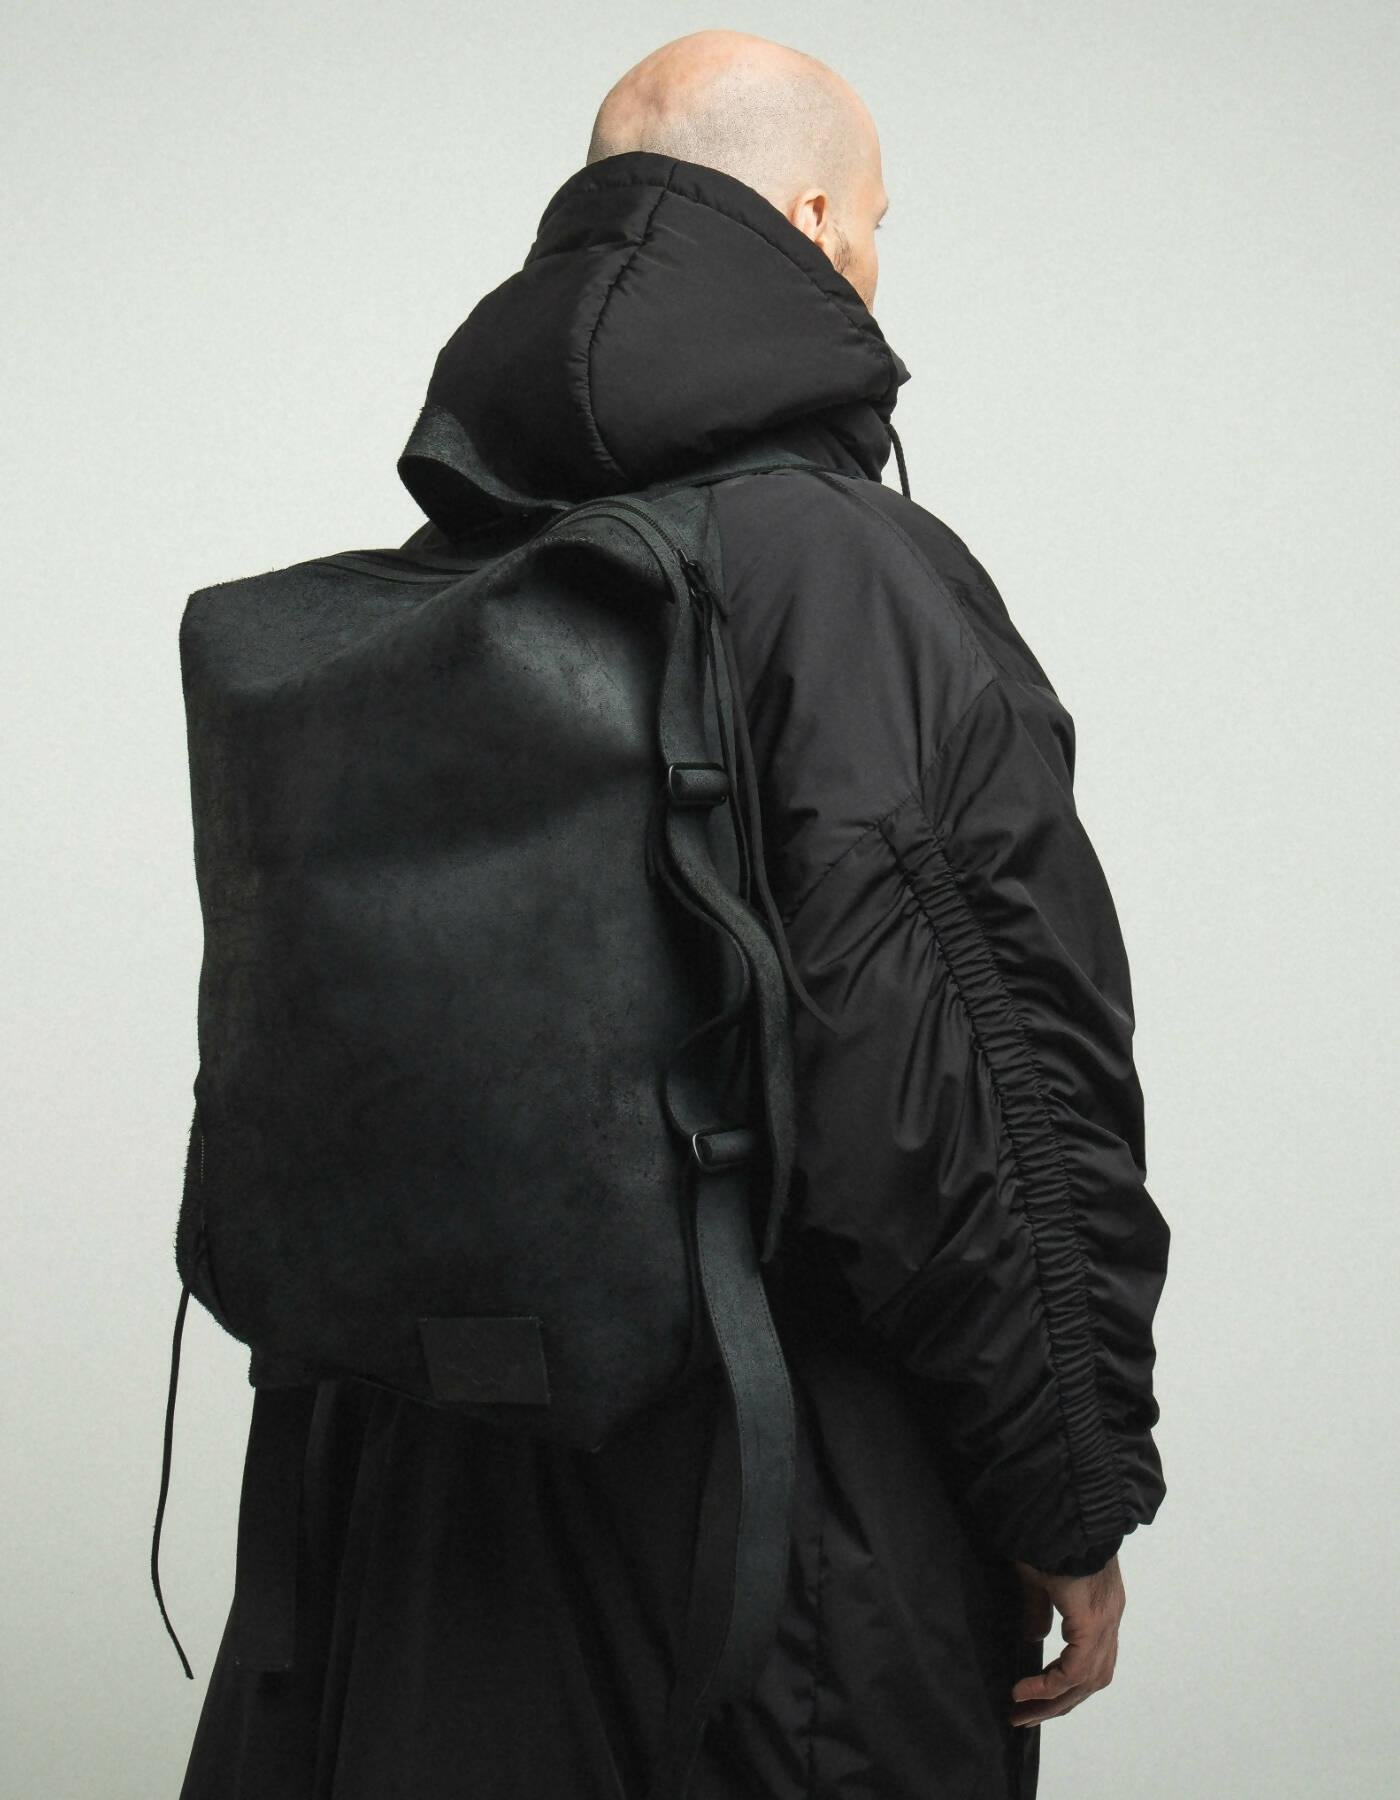 Robust Backpack by ZSIGMOND